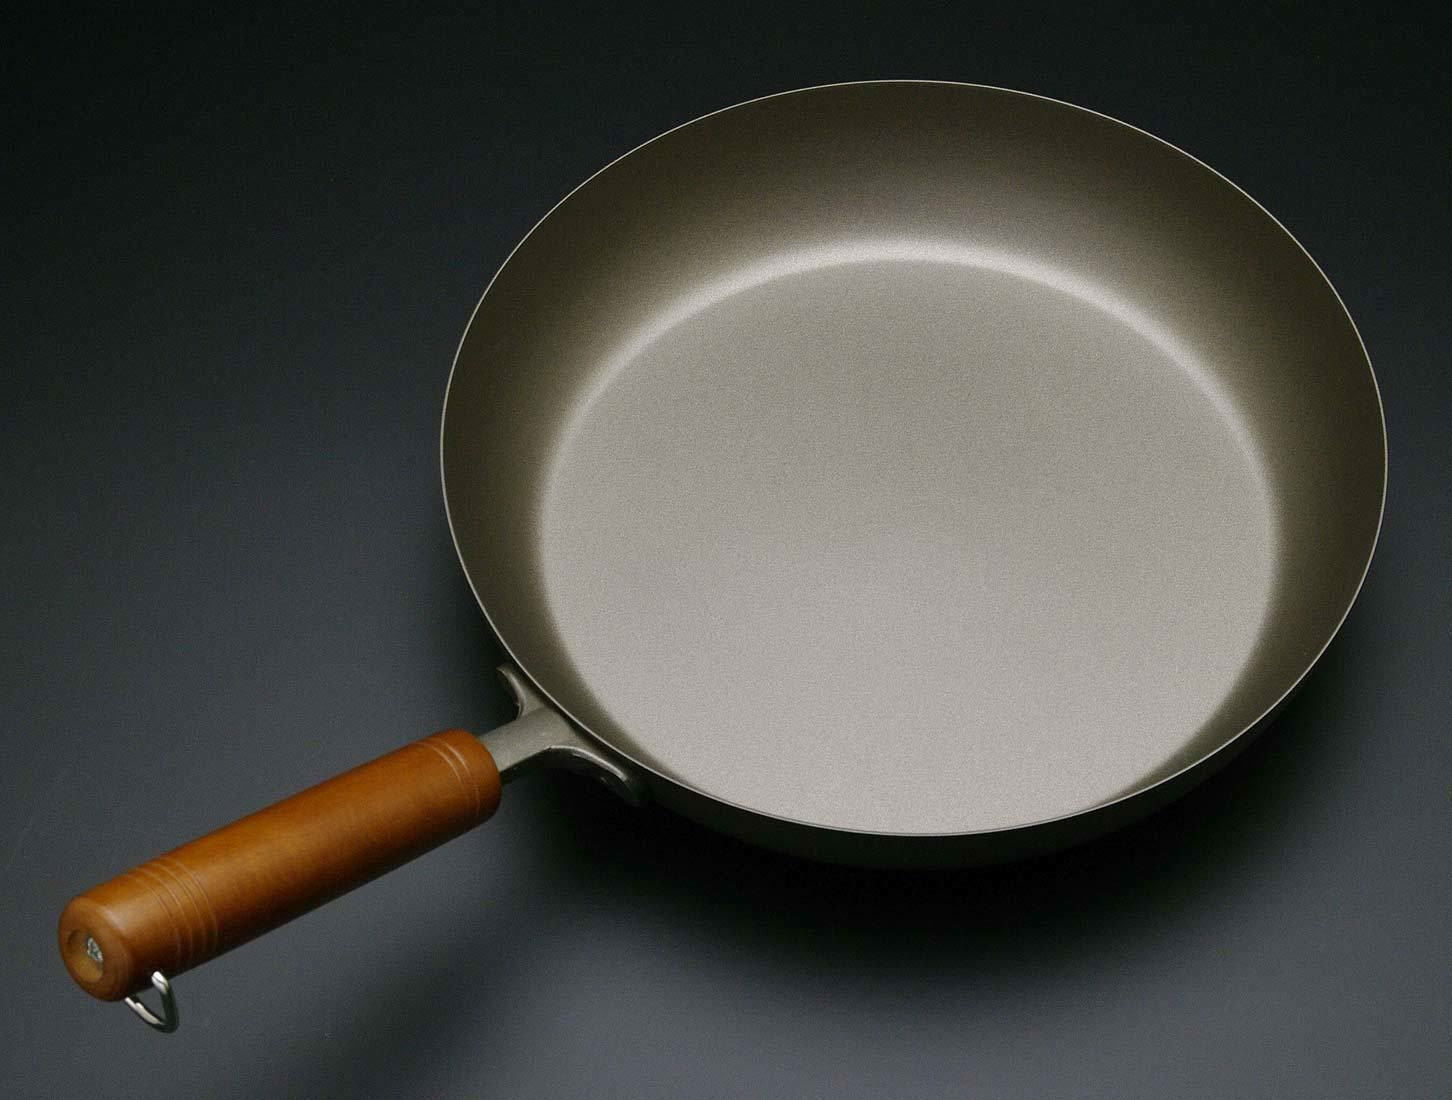 Pure Titanium Wok,Kitchen Cookware,Uncoated Non-stick Pan Frying